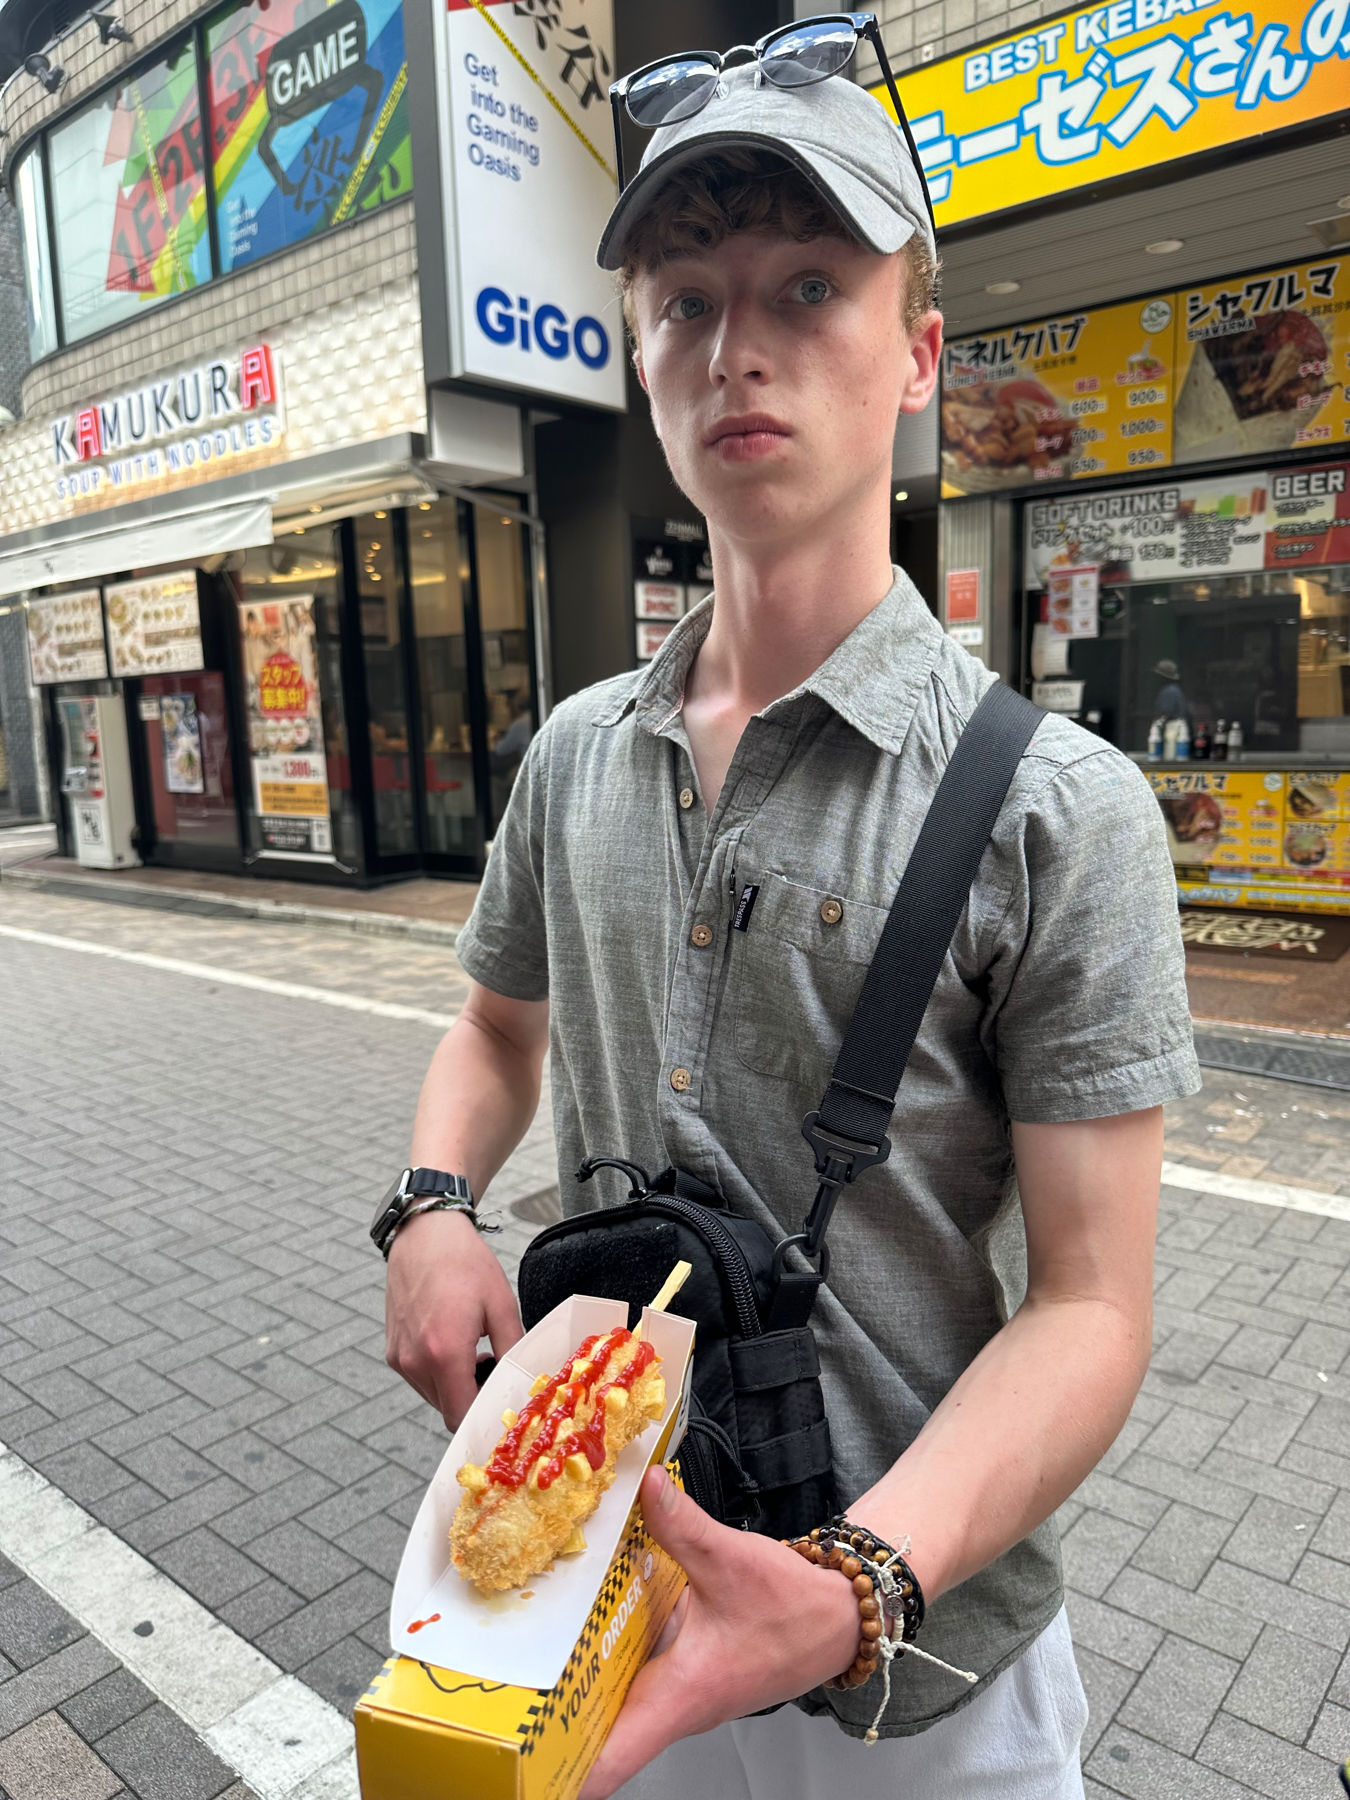 My son holding a Korean style hot dog on the streets of Shibuya